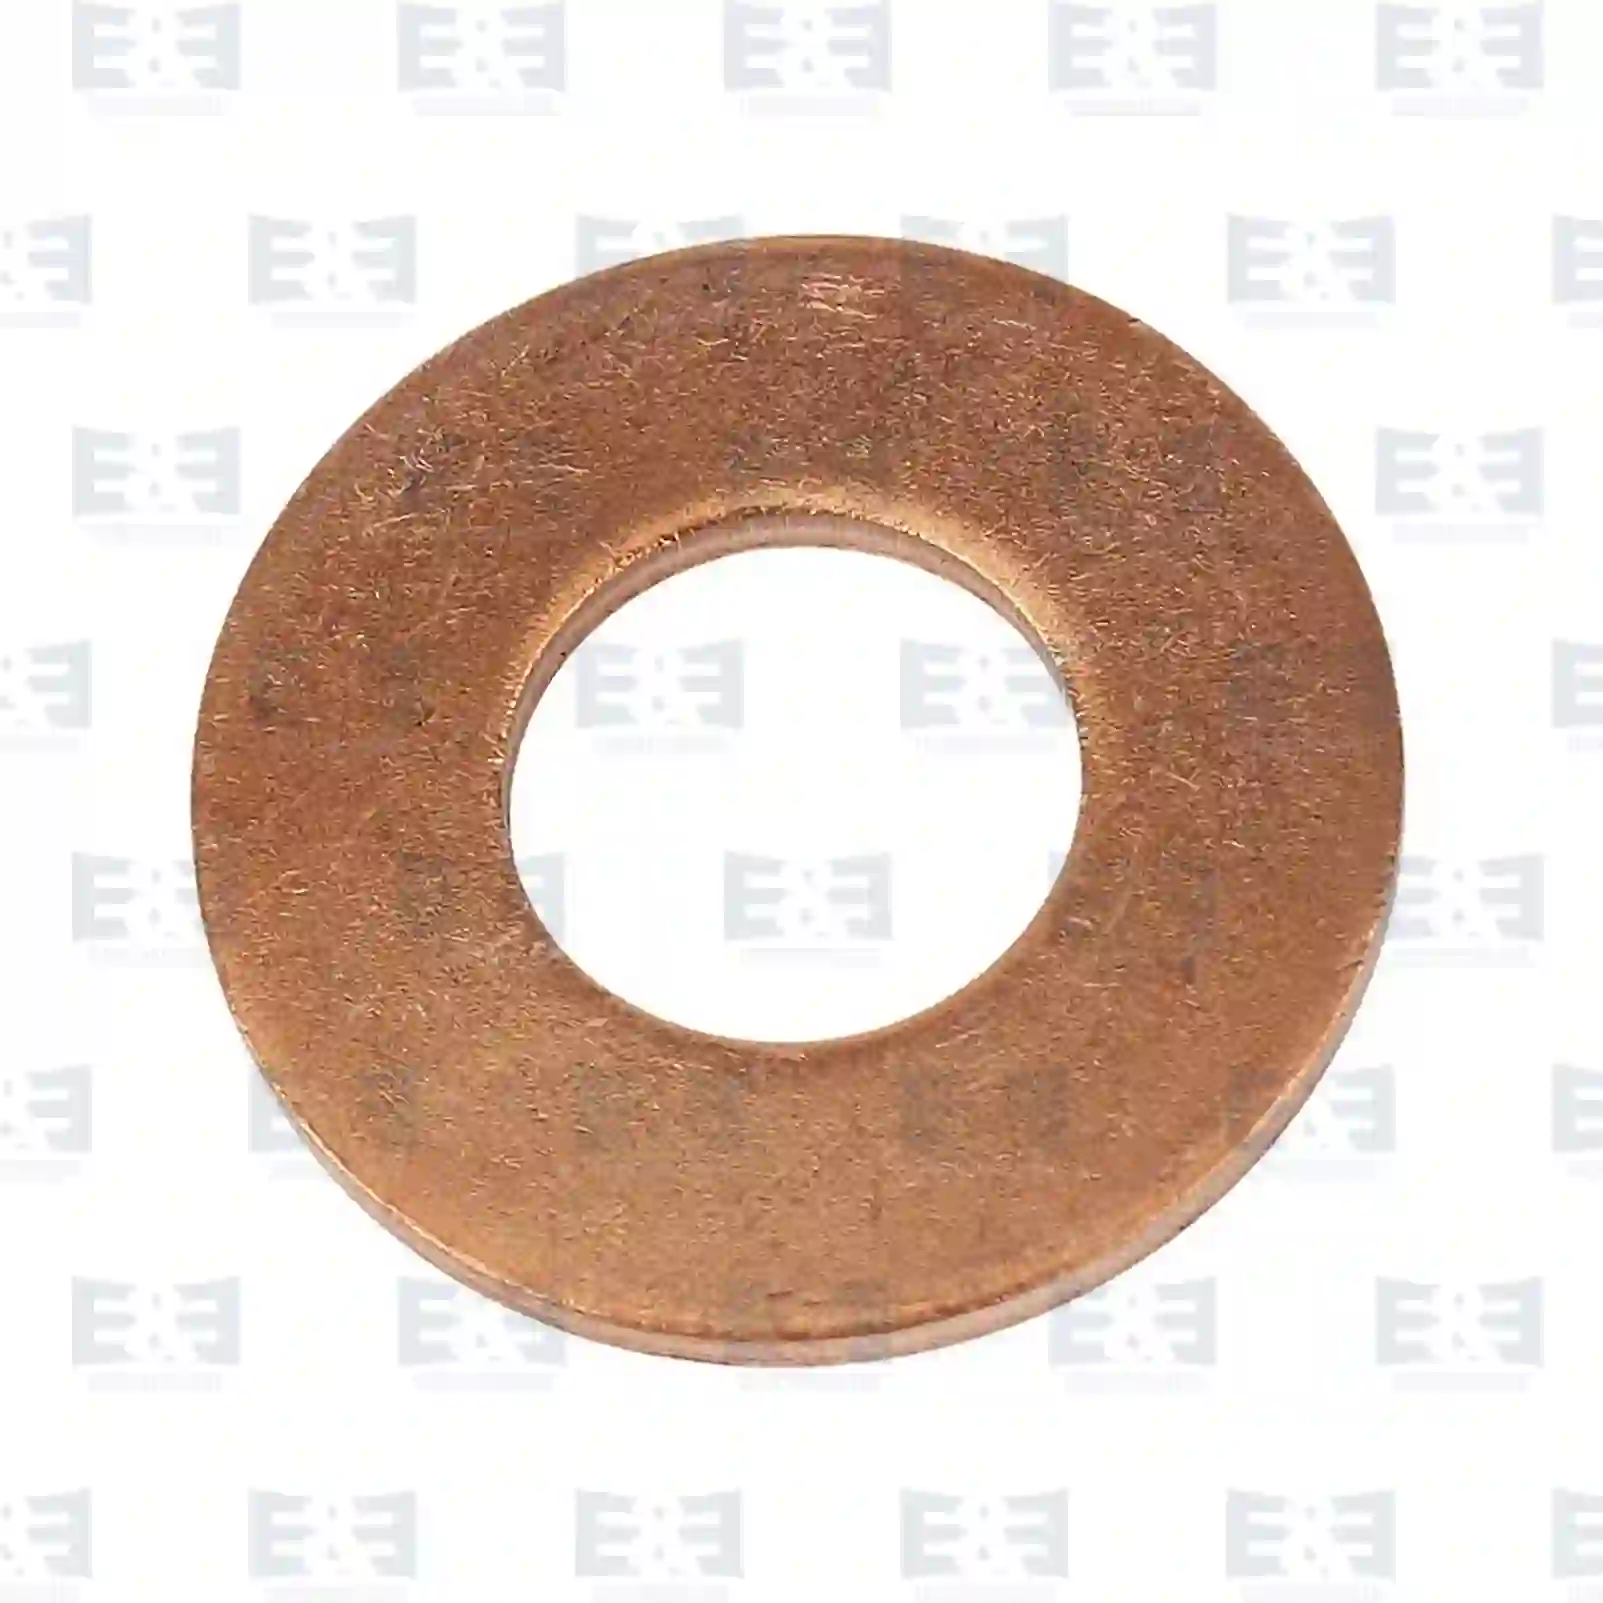  Cylinder Head Copper washer, EE No 2E2200044 ,  oem no:51987010076, 3460170260, E&E Truck Spare Parts | Truck Spare Parts, Auotomotive Spare Parts